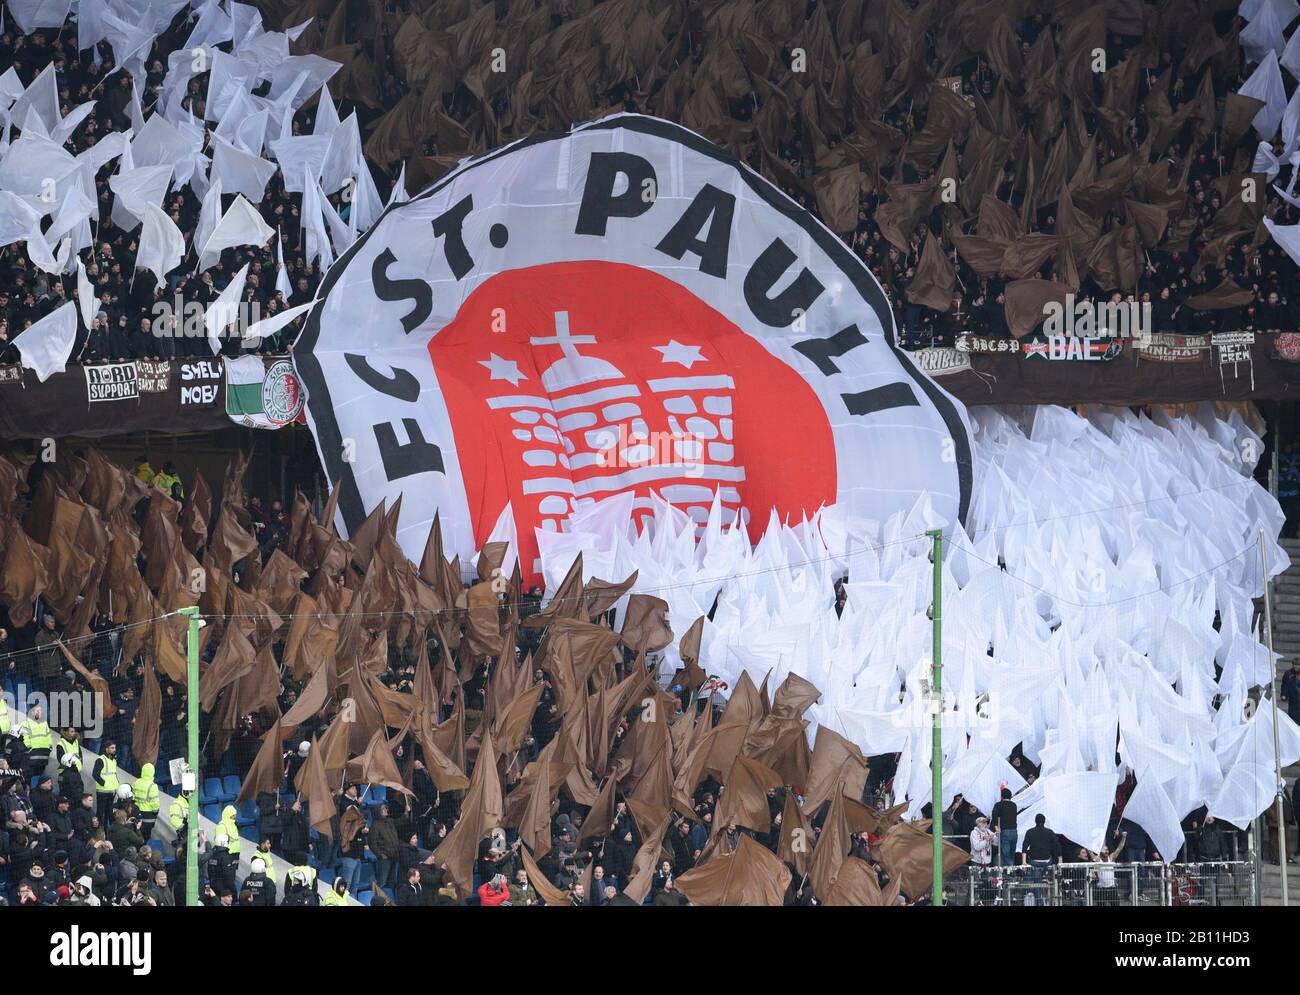 Hamburg, Germany. 22nd Feb, 2020. Football: 2nd Bundesliga, 23rd matchday: Hamburger SV - FC St.Pauli in the Volksparkstadion. The fans of FC St.Pauli hold flags and a large logo banner. Credit: Daniel Bockwoldt/dpa - IMPORTANT NOTE: In accordance with the regulations of the DFL Deutsche Fußball Liga and the DFB Deutscher Fußball-Bund, it is prohibited to exploit or have exploited in the stadium and/or from the game taken photographs in the form of sequence images and/or video-like photo series./dpa/Alamy Live News Stock Photo